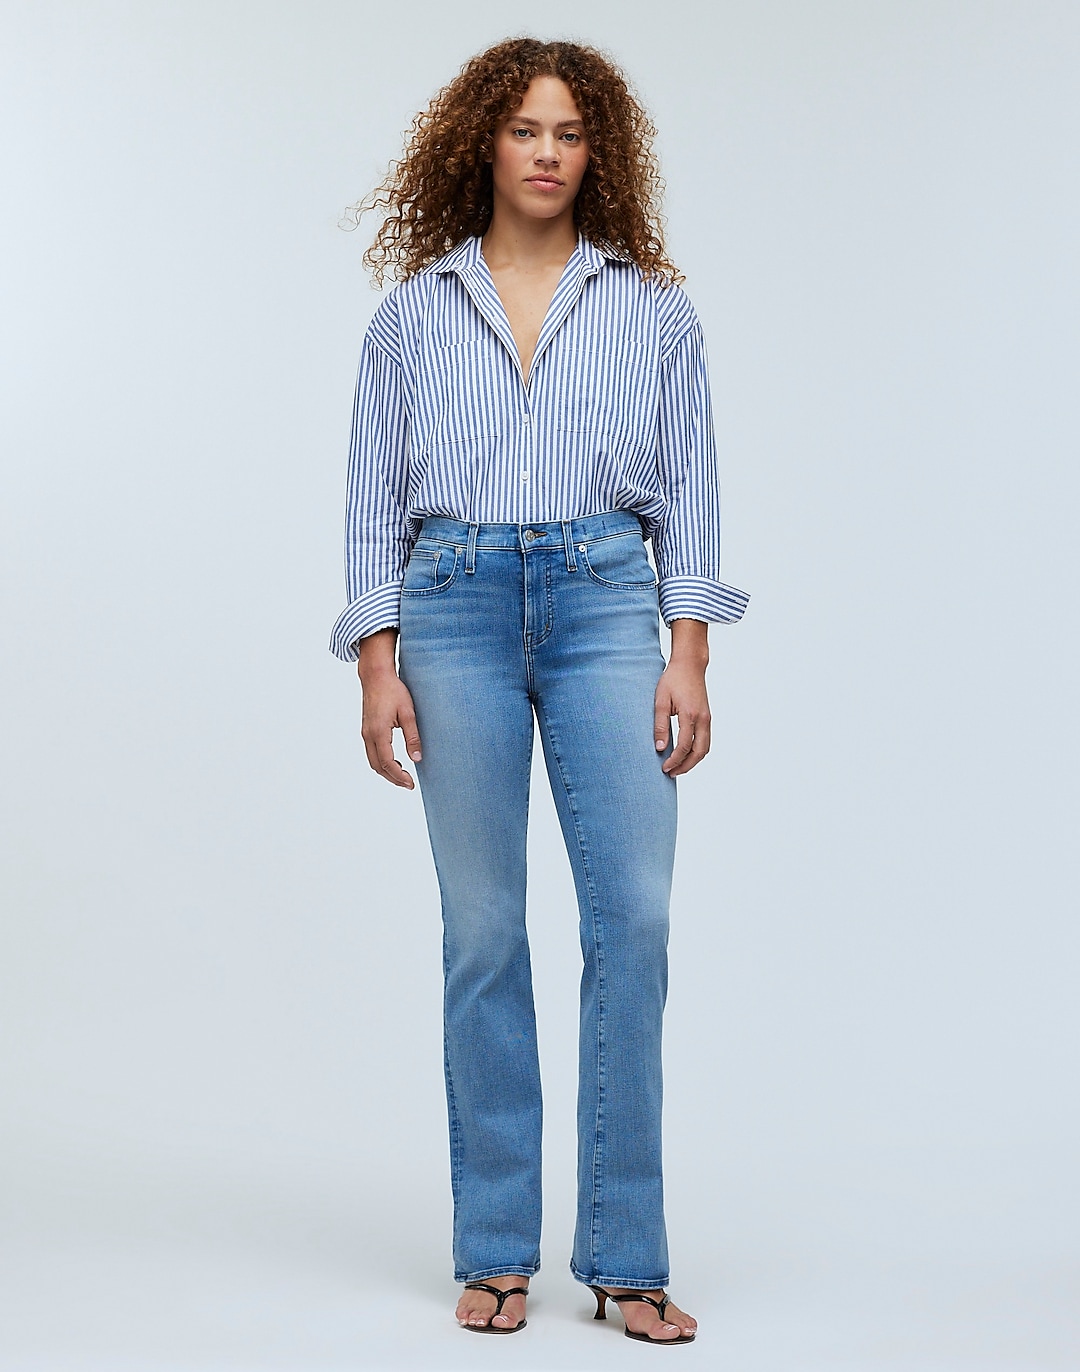 Kick Out Full-Length Jeans in Merrigan Wash | Madewell